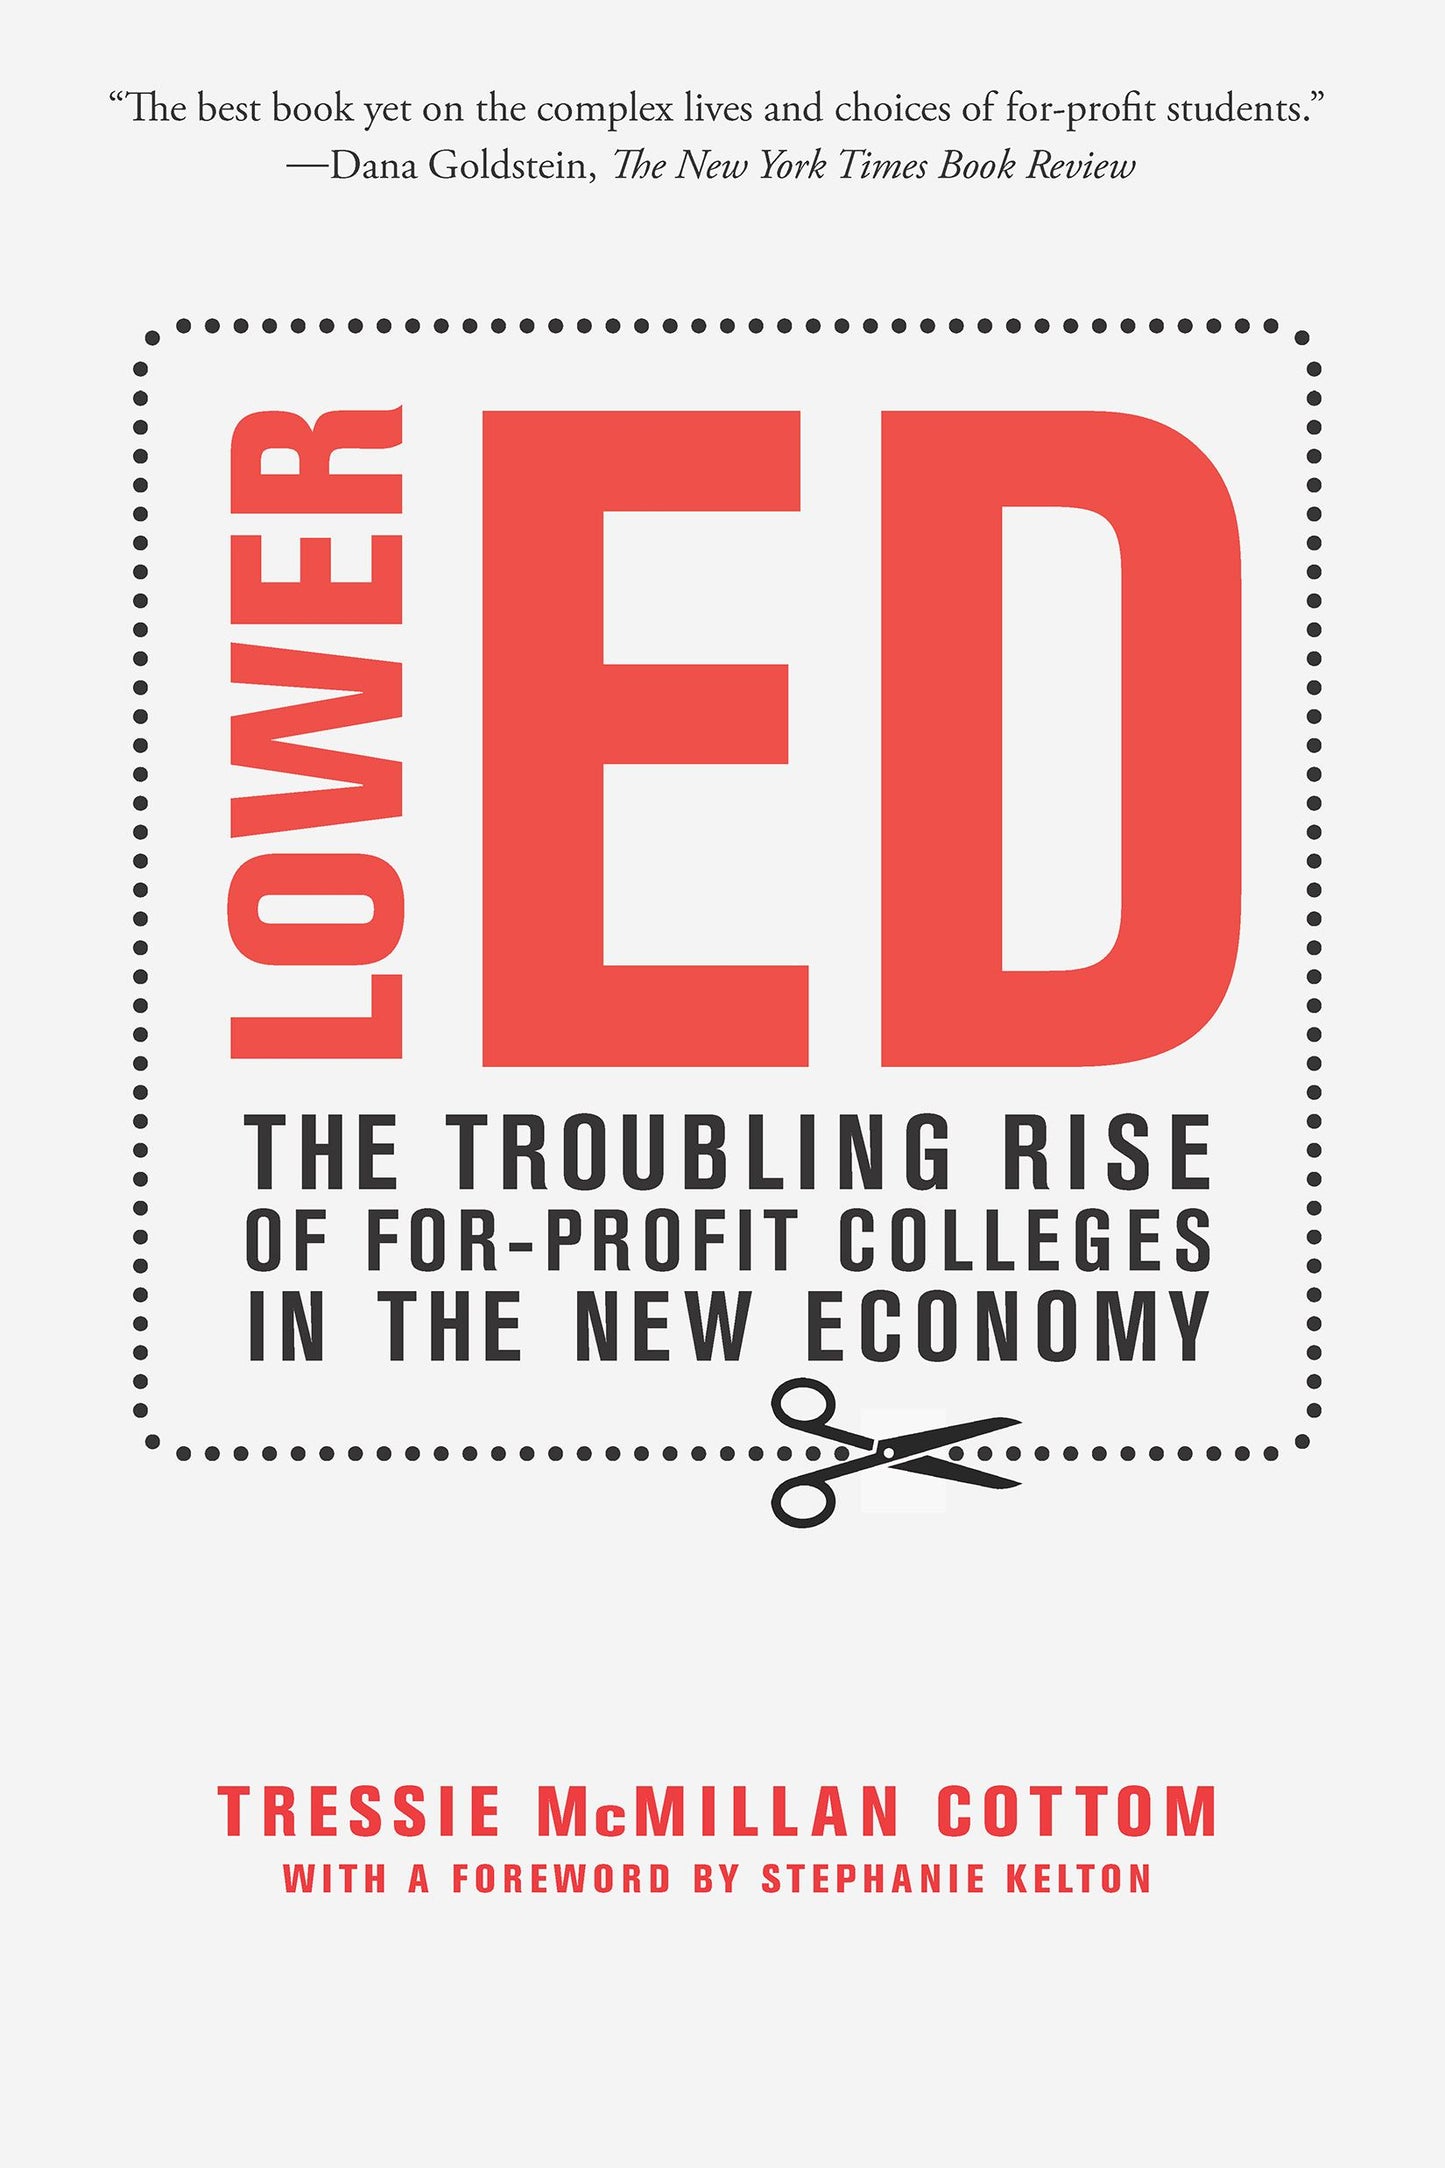 Lower Ed // The Troubling Rise of For-Profit Colleges in the New Economy